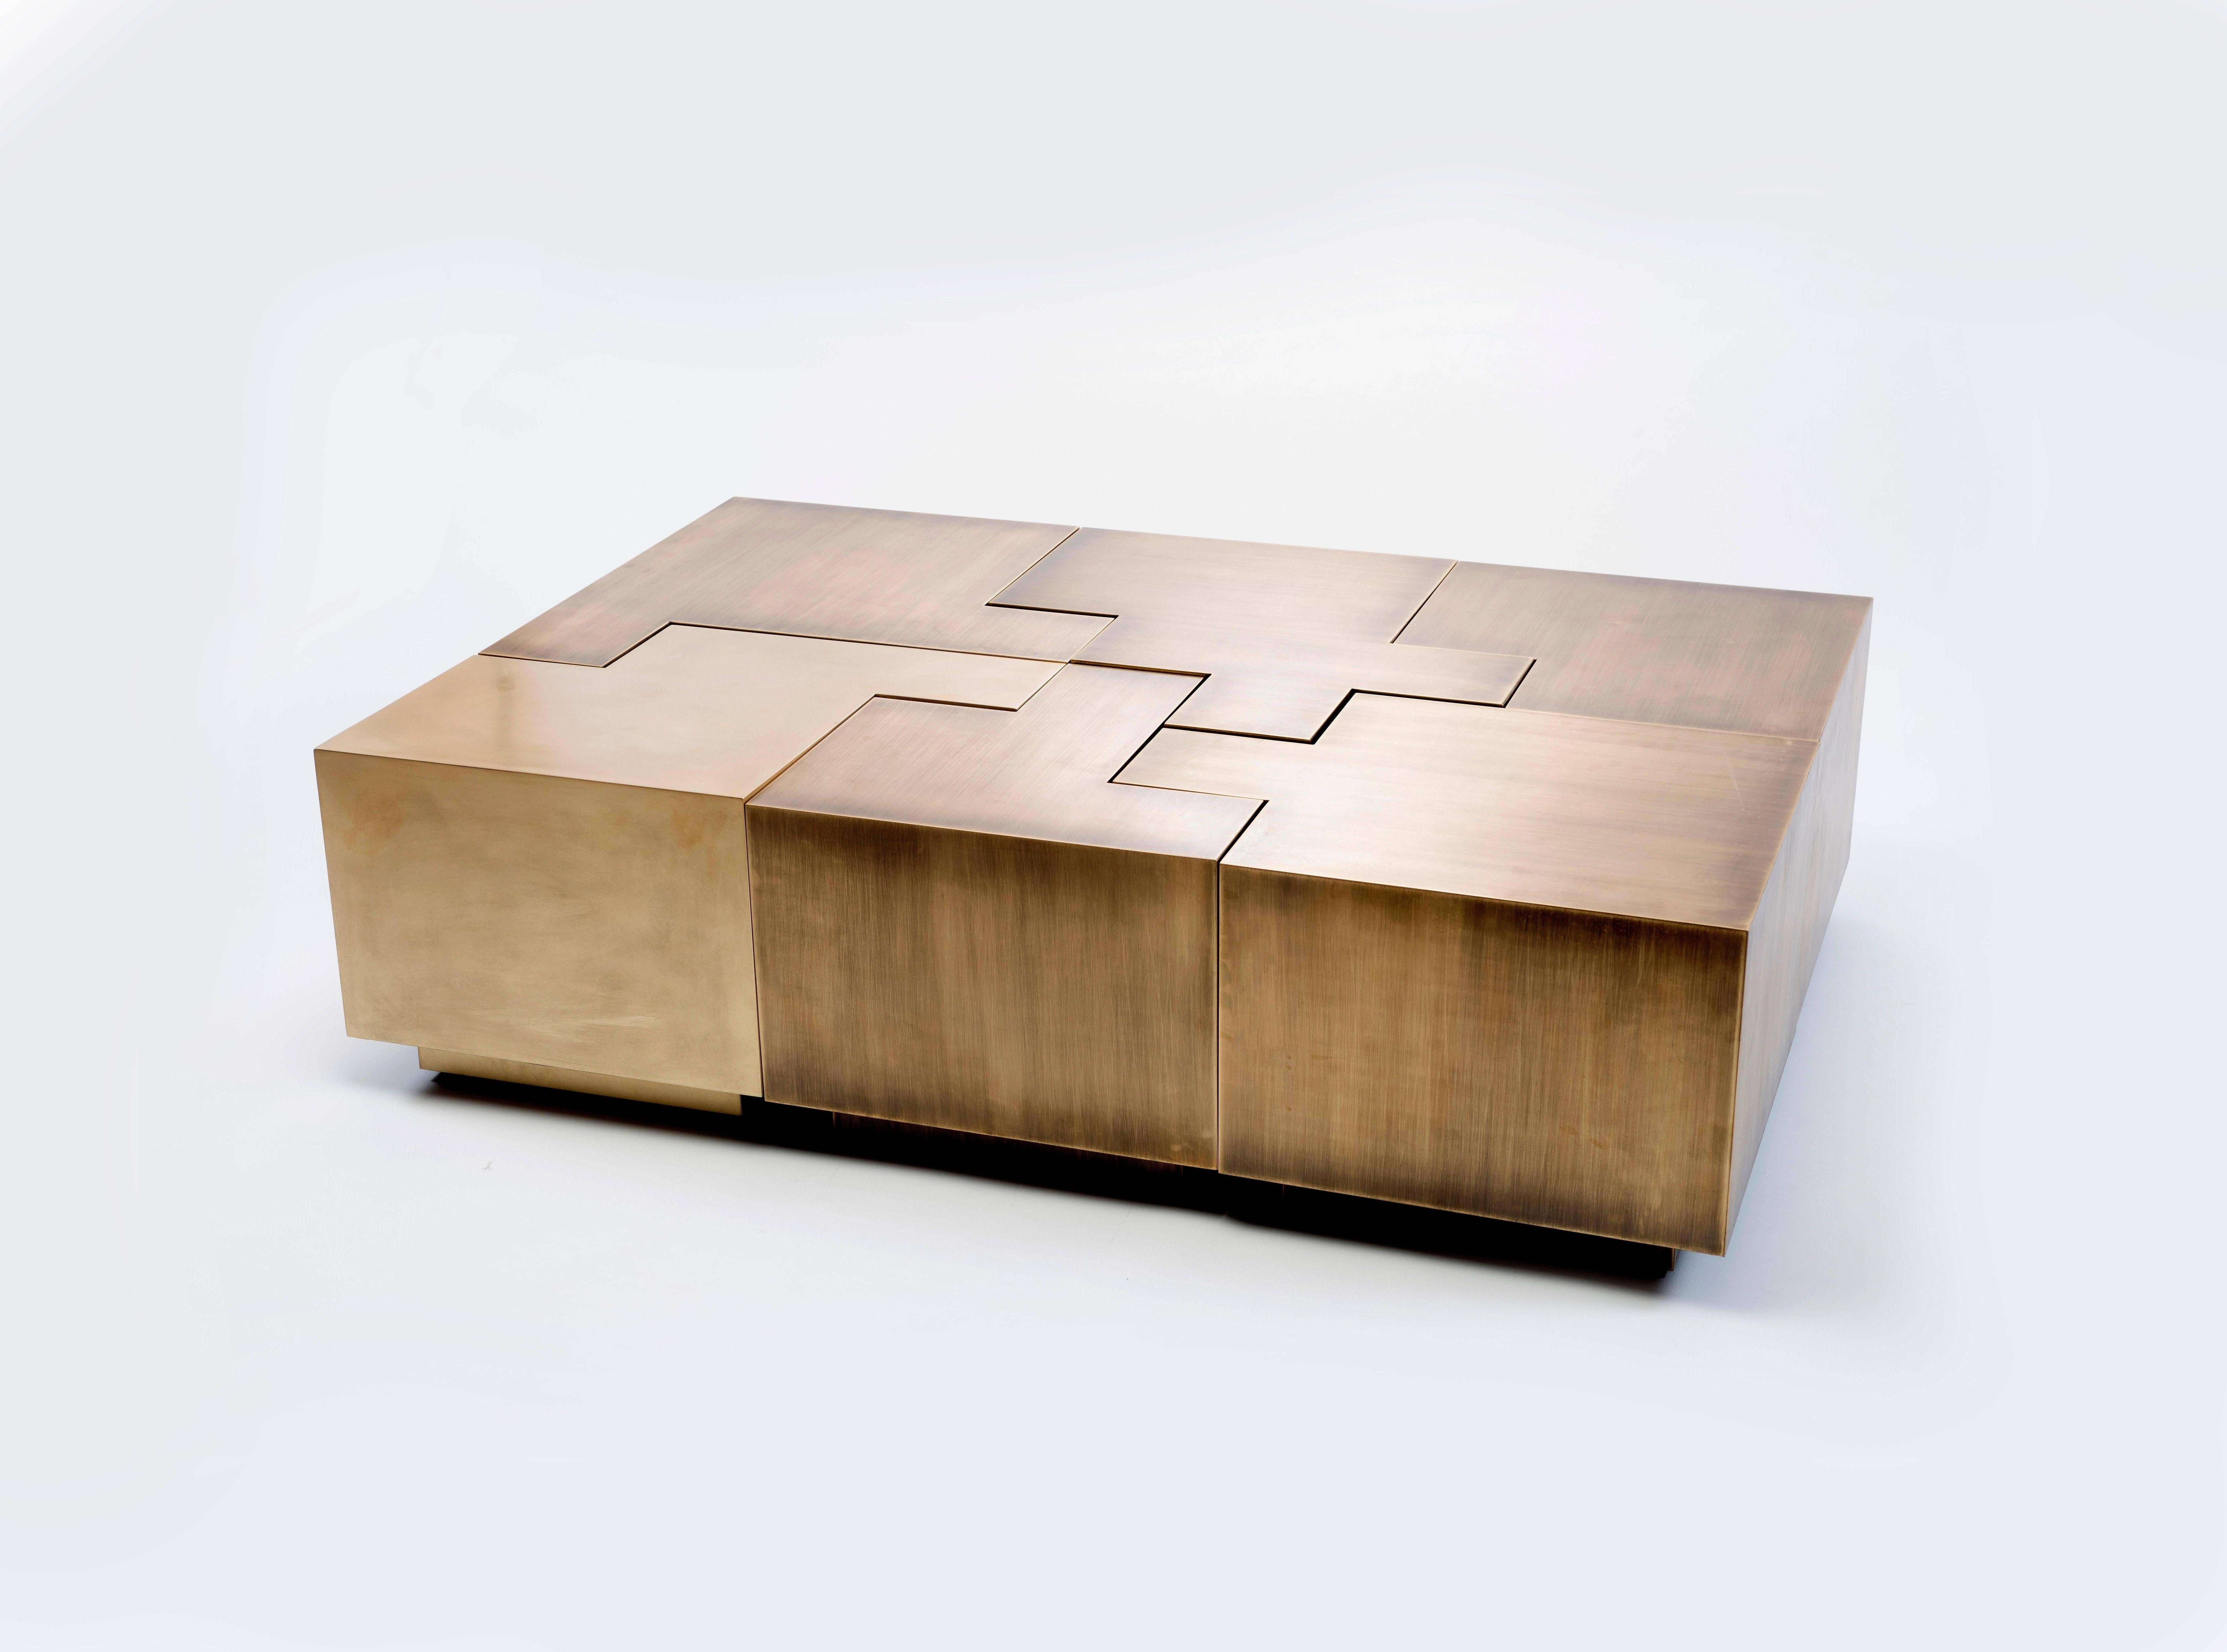 Puzzle style coffee table comprised of six individual sections that can be moved and positioned as desired.

Gulla Jónsdóttir creates unexpected and poetic modern architecture and interior spaces. Known for her sensual and dynamic forms that work